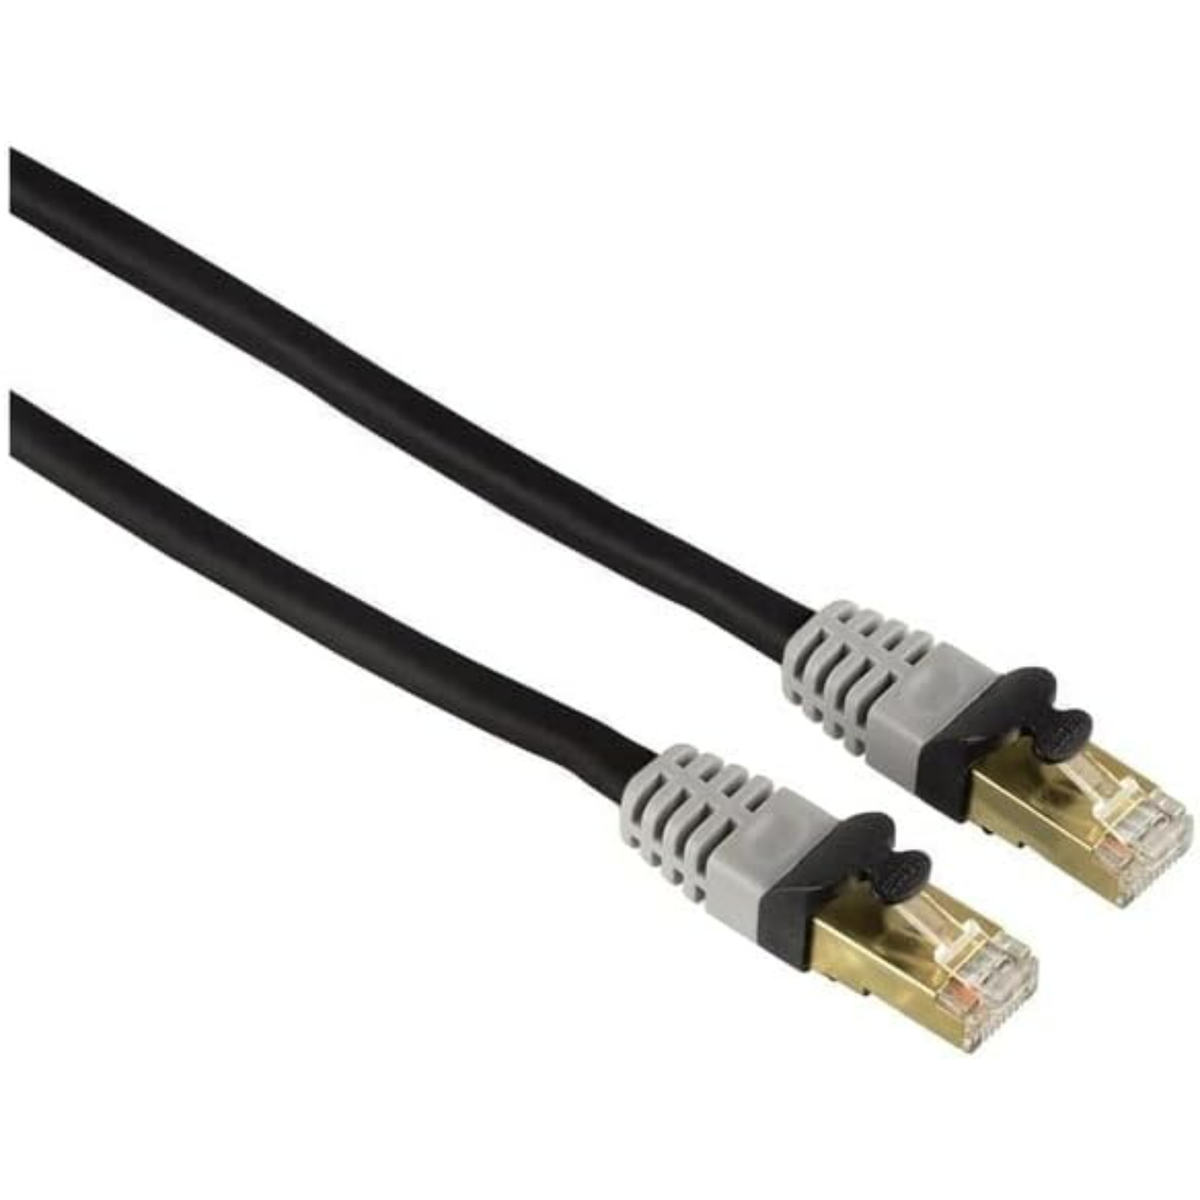 Hama CAT-6 Gold Plated Double Shielded Network Cable, 1.5 m, D3053750